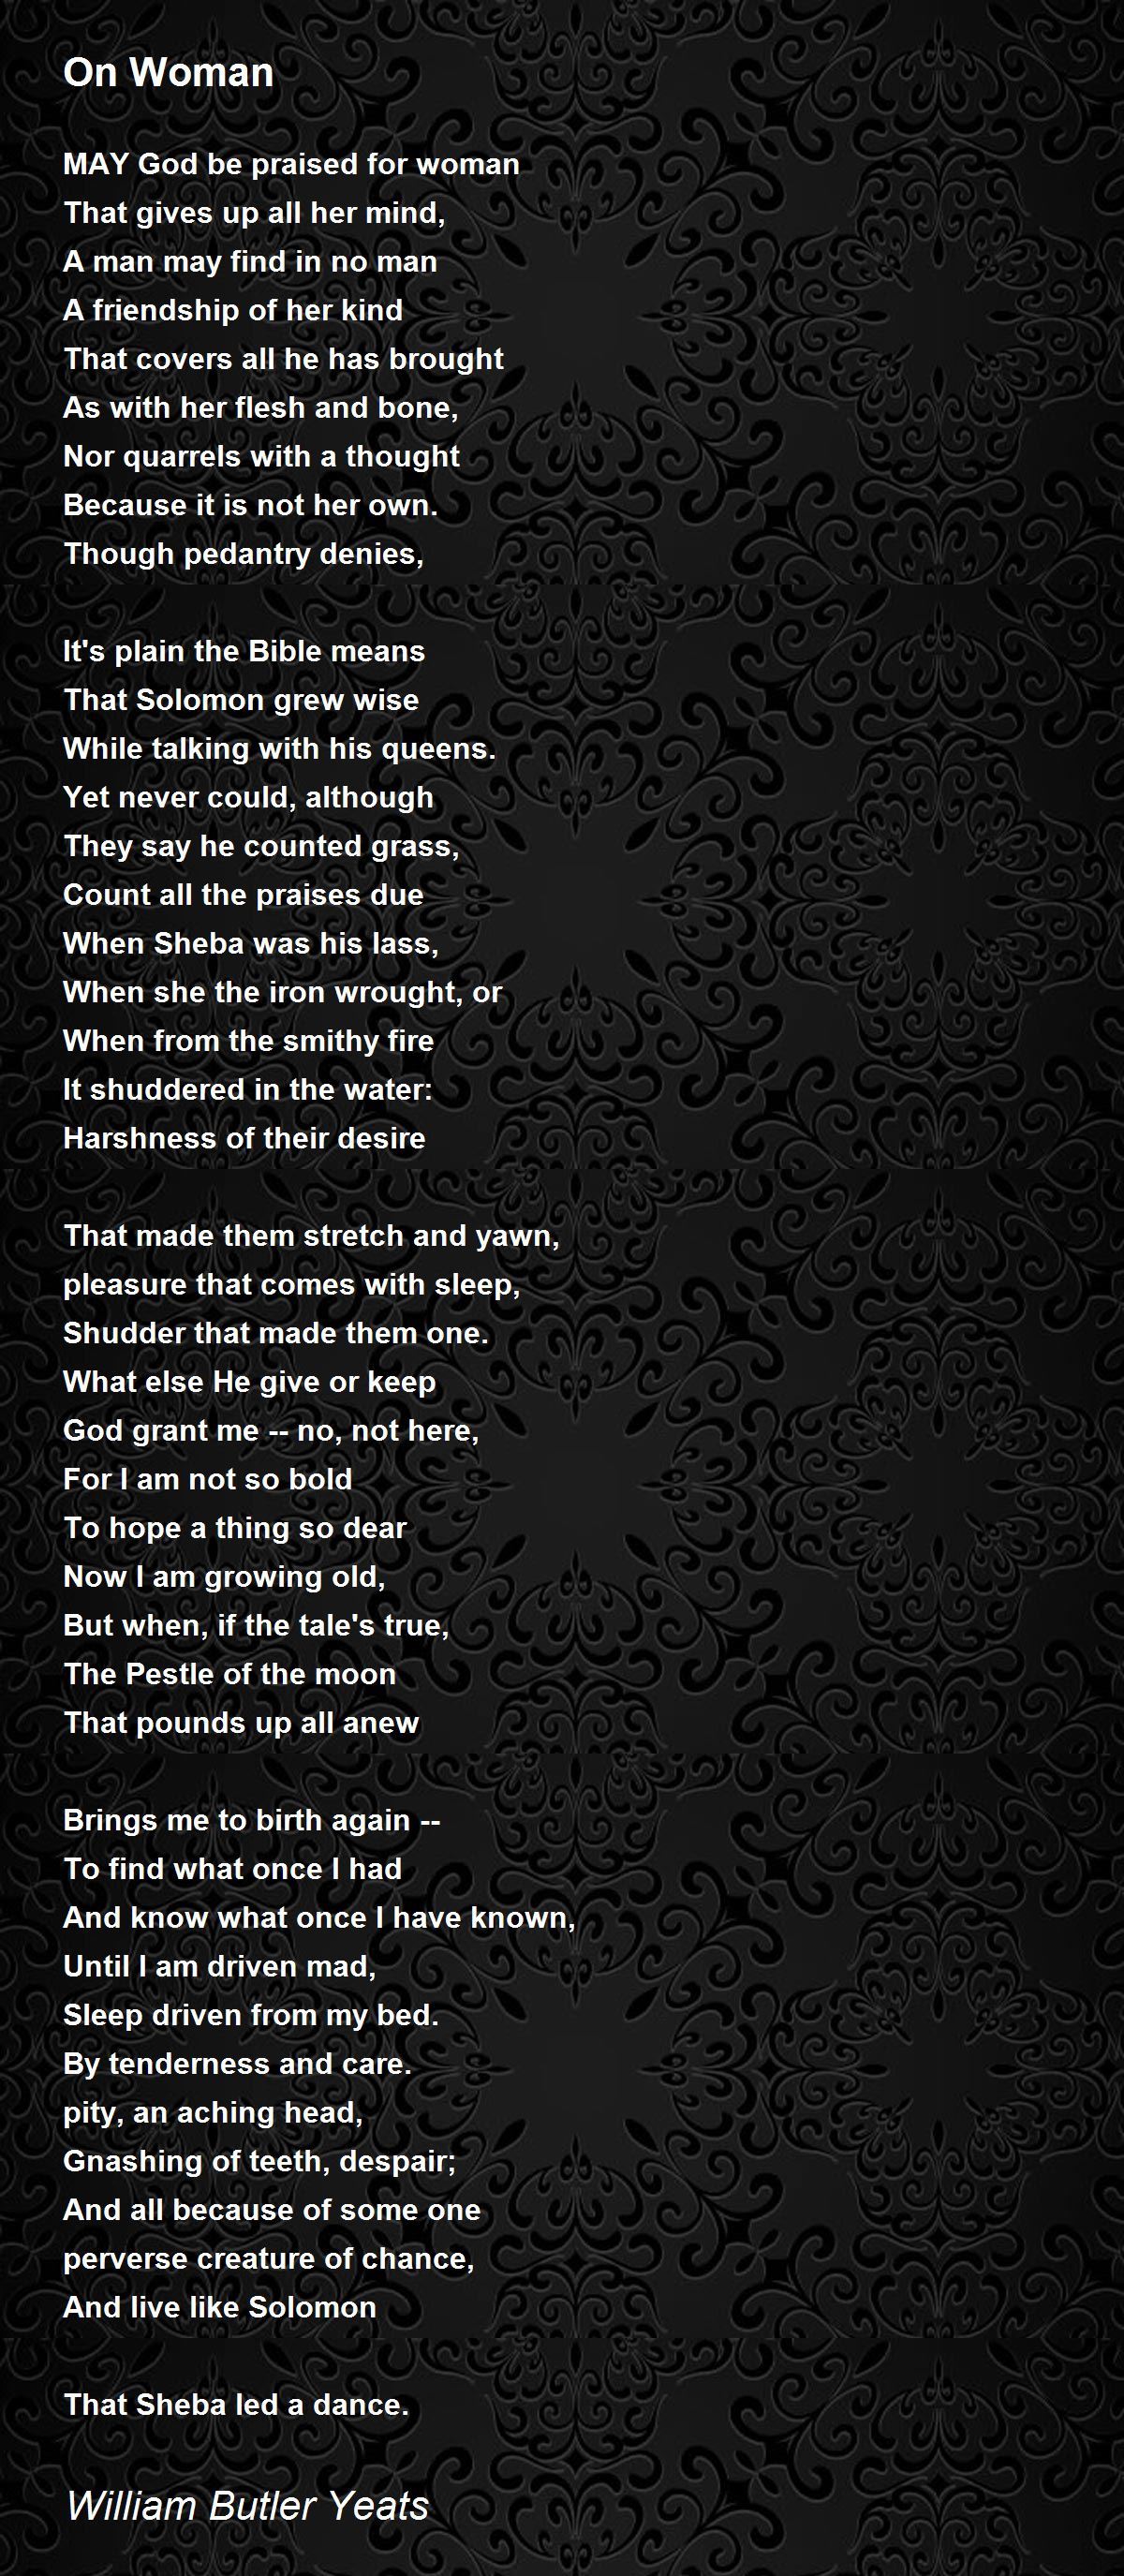 On Woman Poem by William Butler Yeats - Poem Hunter